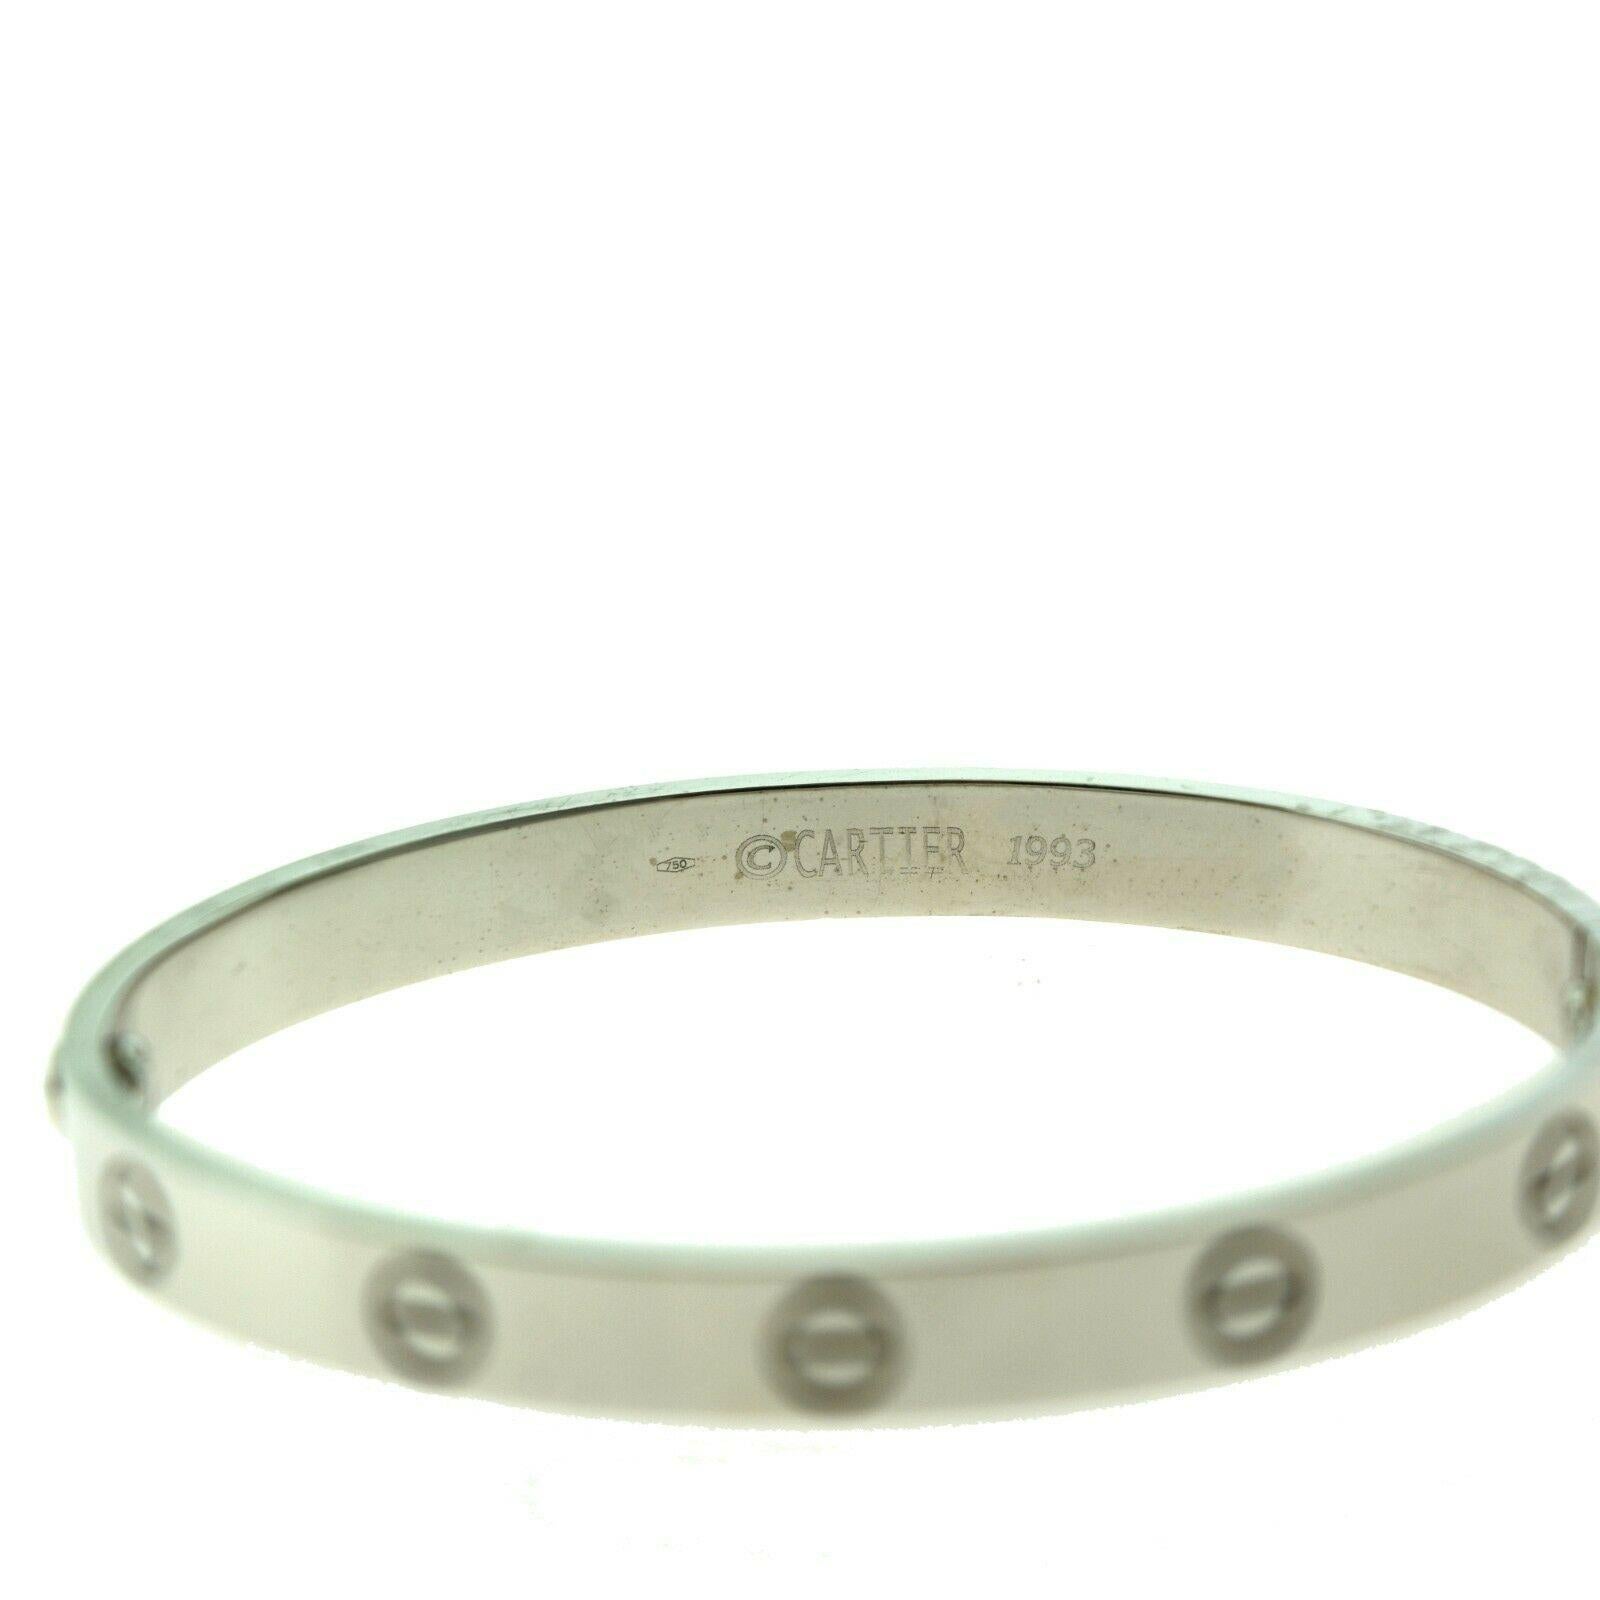 Condition: Pre Owned

Designer: Cartier

Collection: Love

Style: Bracelet / Bangle

Metal: White Gold

Metal Purity: 18k

Size: 17= 17 cm

Screw Style System: Old Style (Screws come off)

Includes:  24 Months Brilliance Jewels Warranty

           